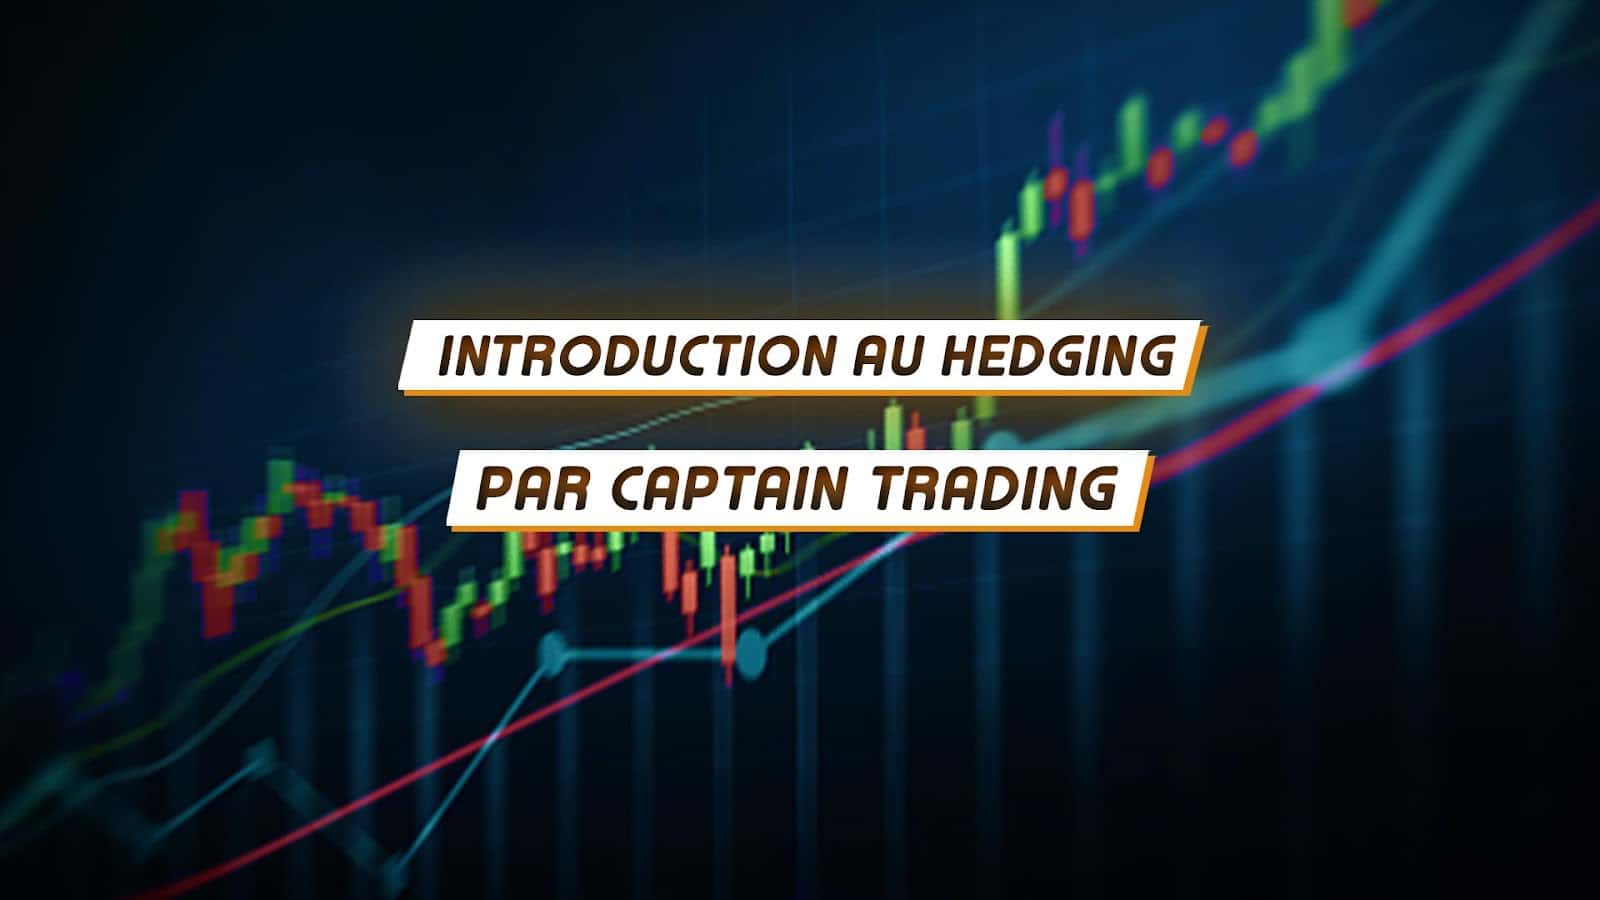 captain trading, trading, hedging, bitcoin, ethereum